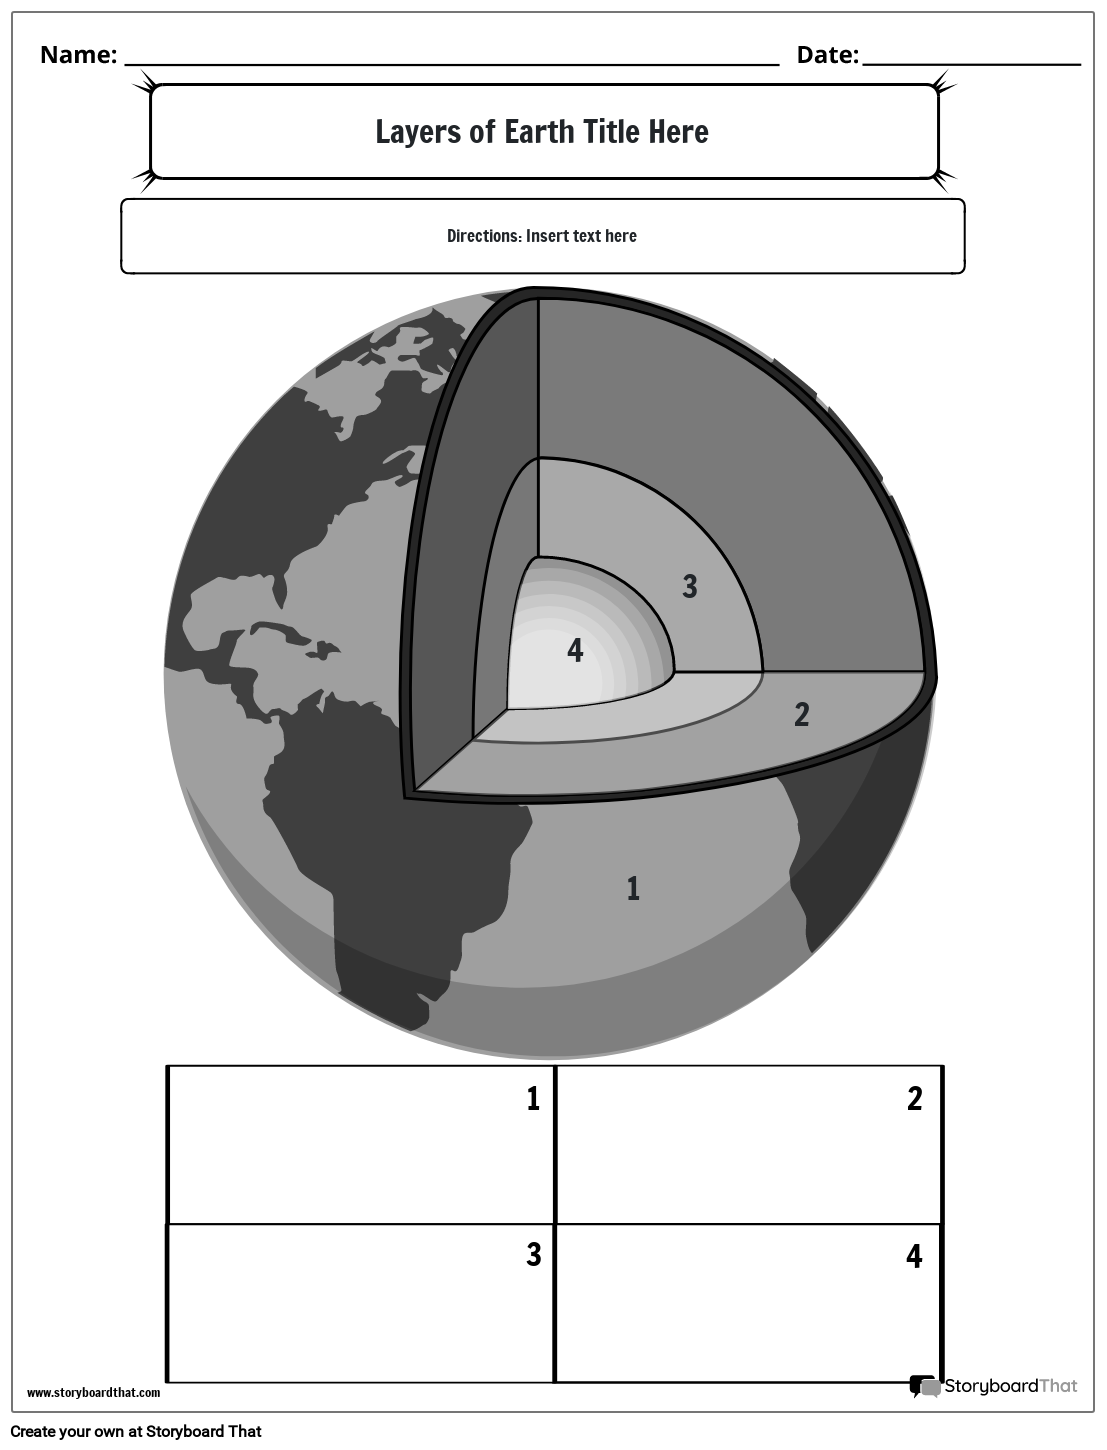 layers-of-the-earth-worksheets-exploring-inside-earth-storyboardthat